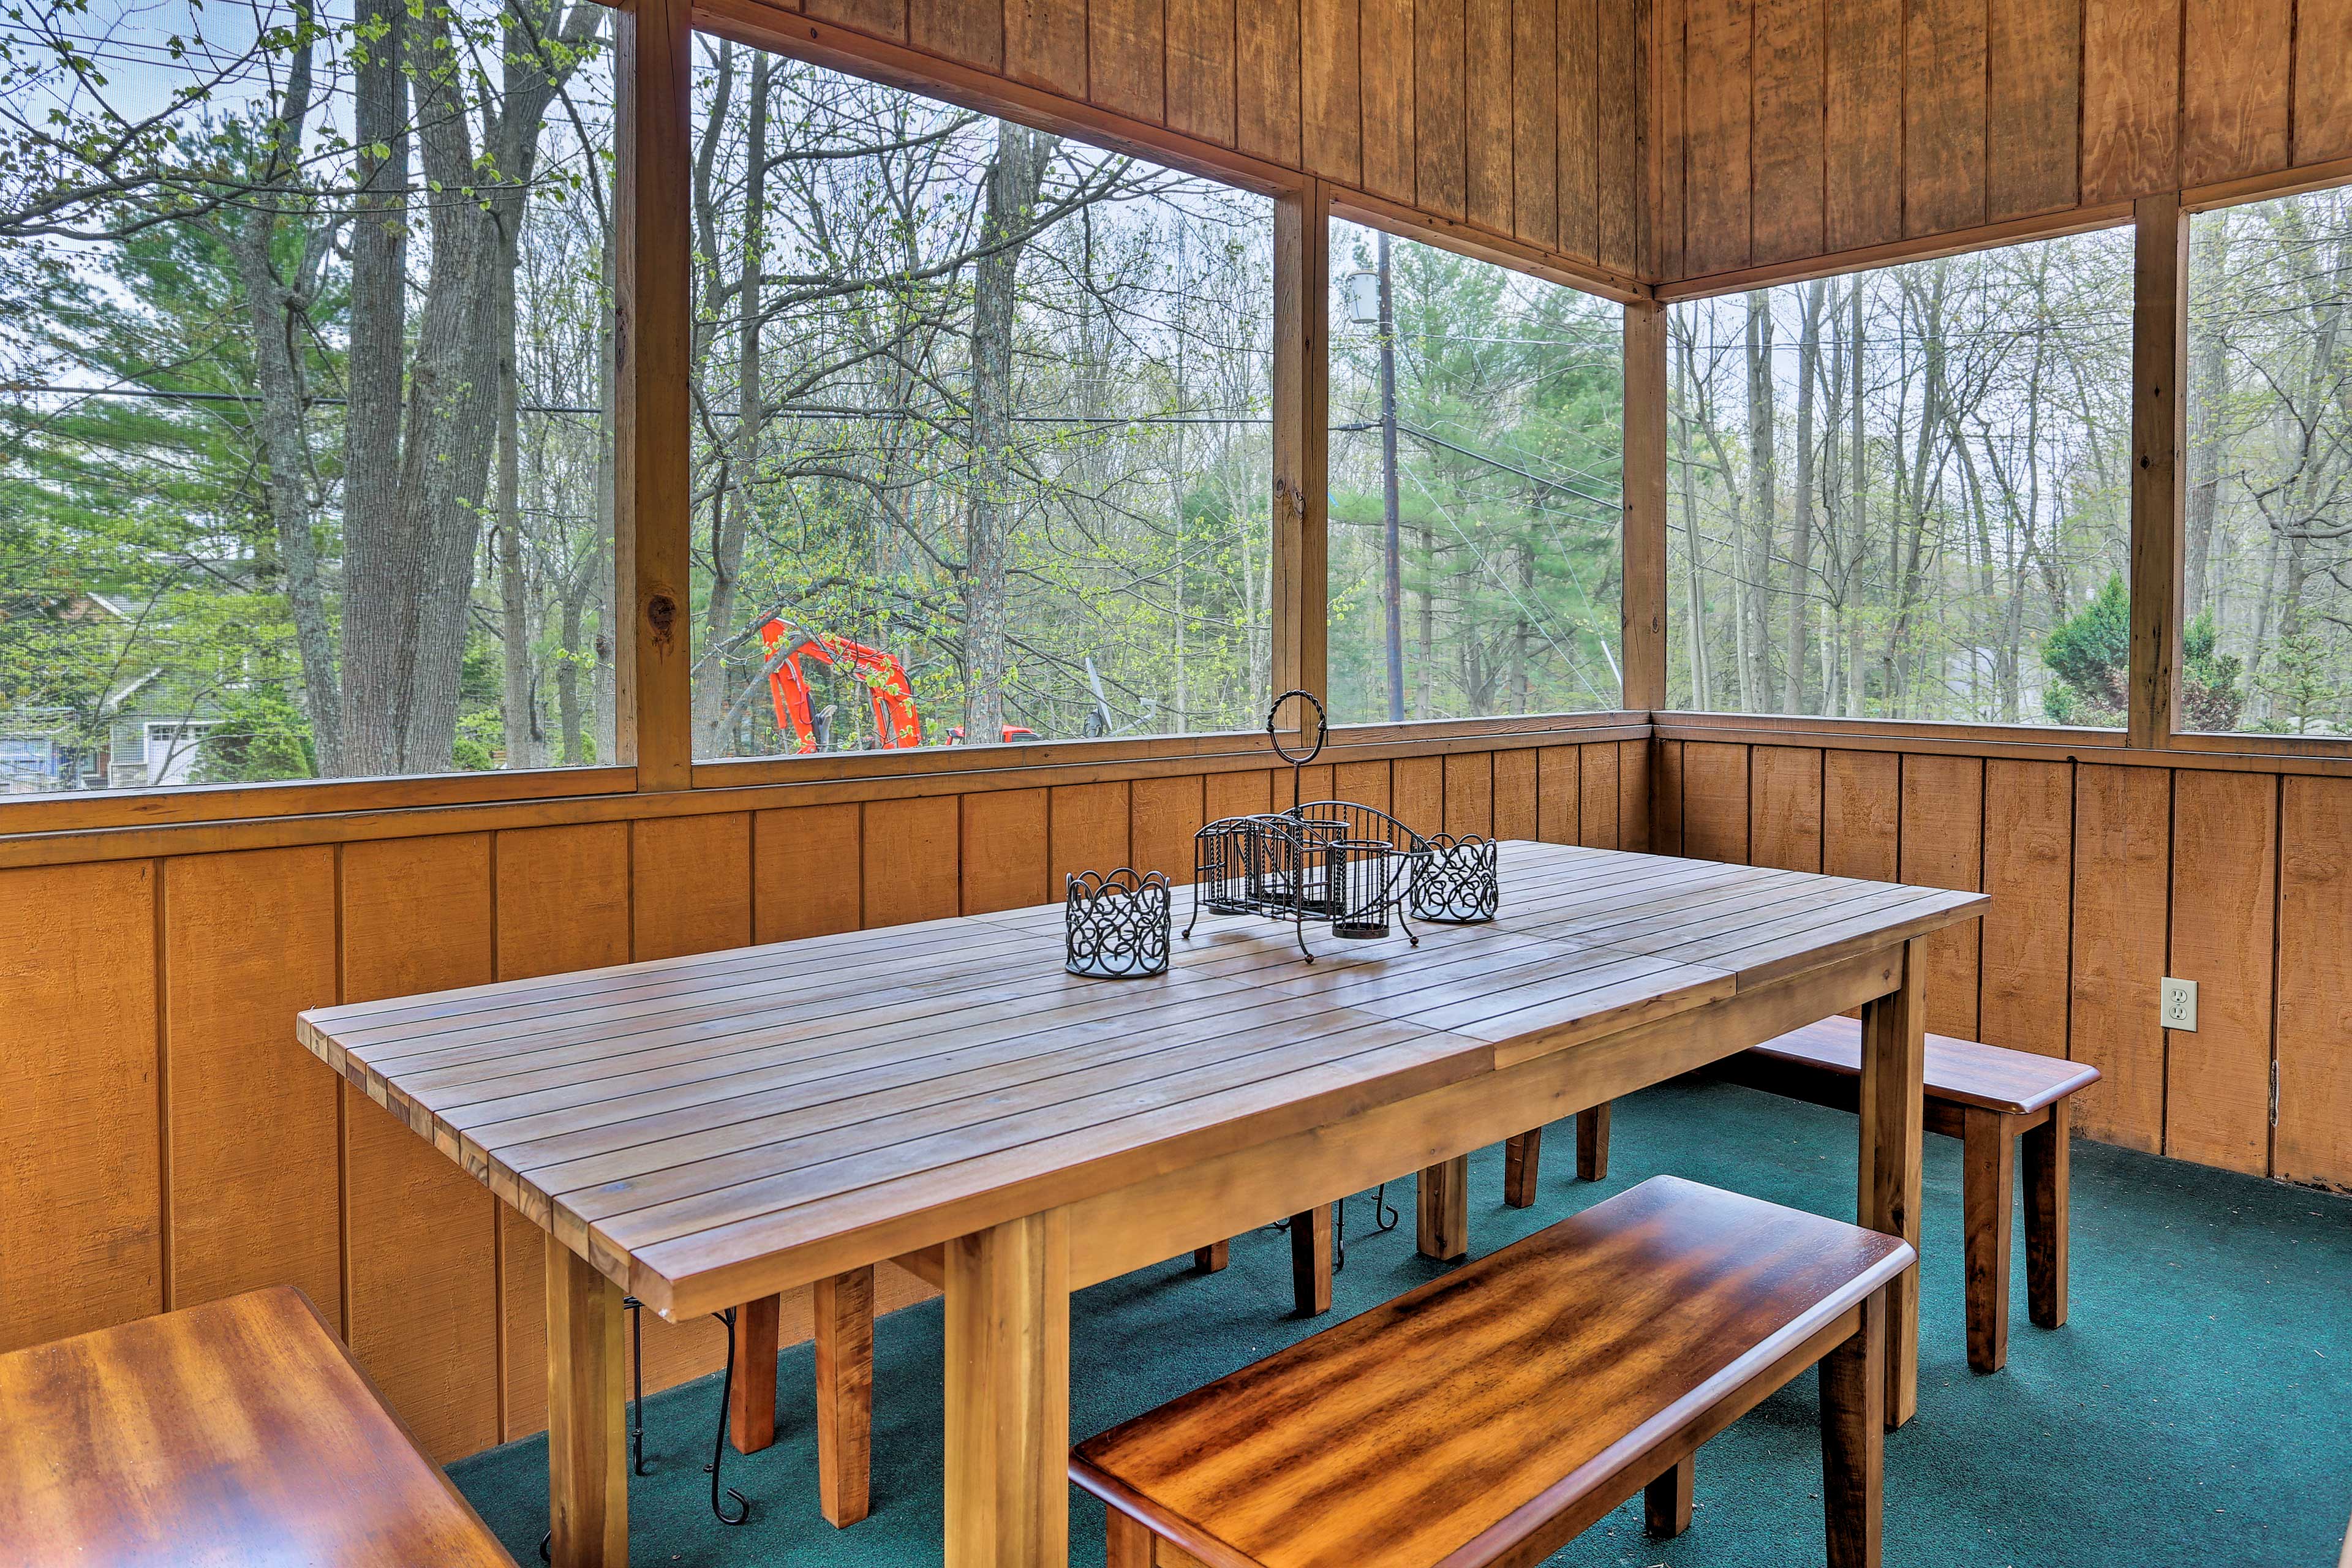 Enjoy the nice weather out on the screened-in porch.